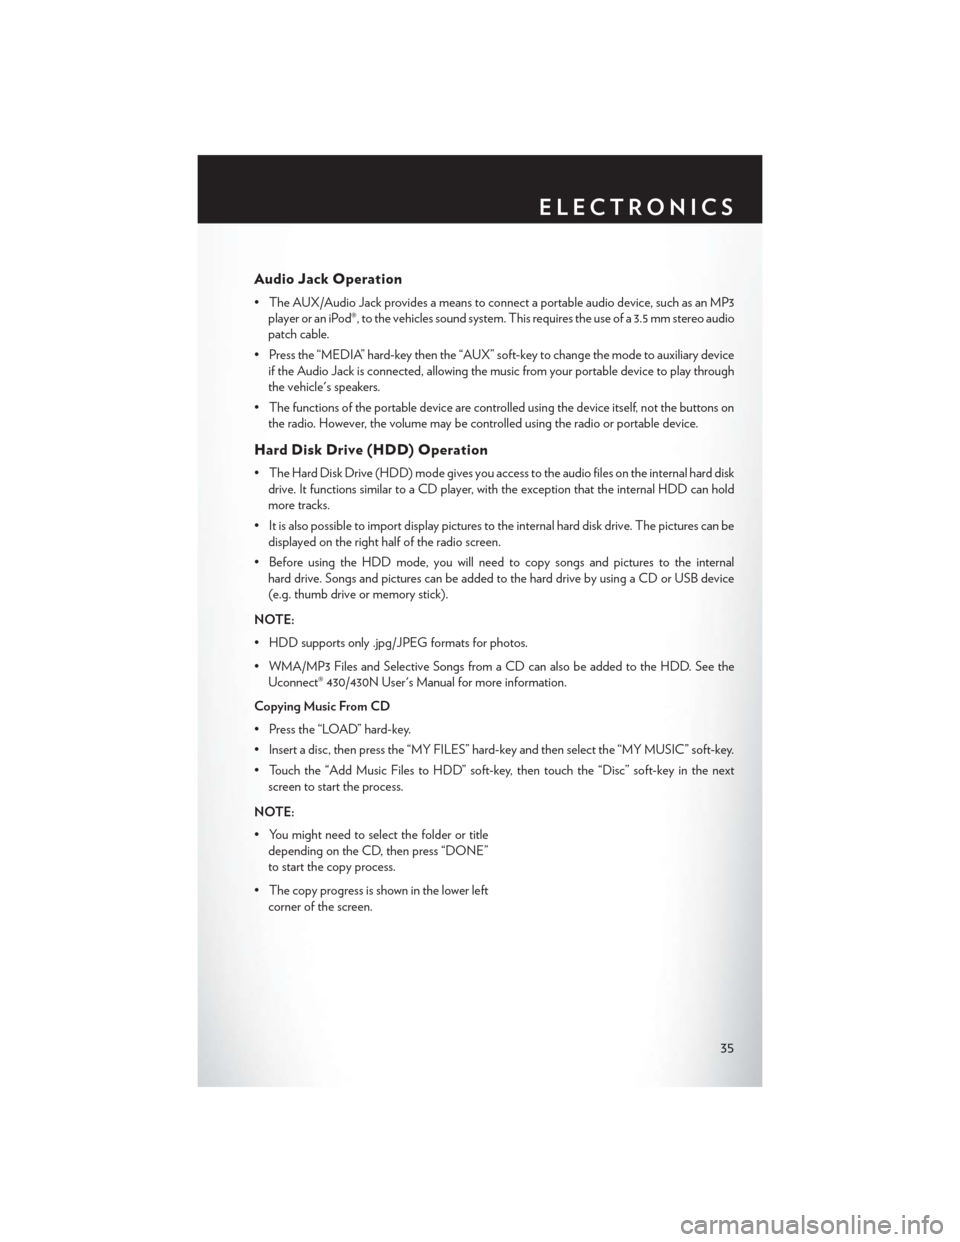 CHRYSLER 200 2013 1.G User Guide Audio Jack Operation
• The AUX/Audio Jack provides a means to connect a portable audio device, such as an MP3player or an iPod®, to the vehicles sound system. This requires the use of a 3.5 mm ster